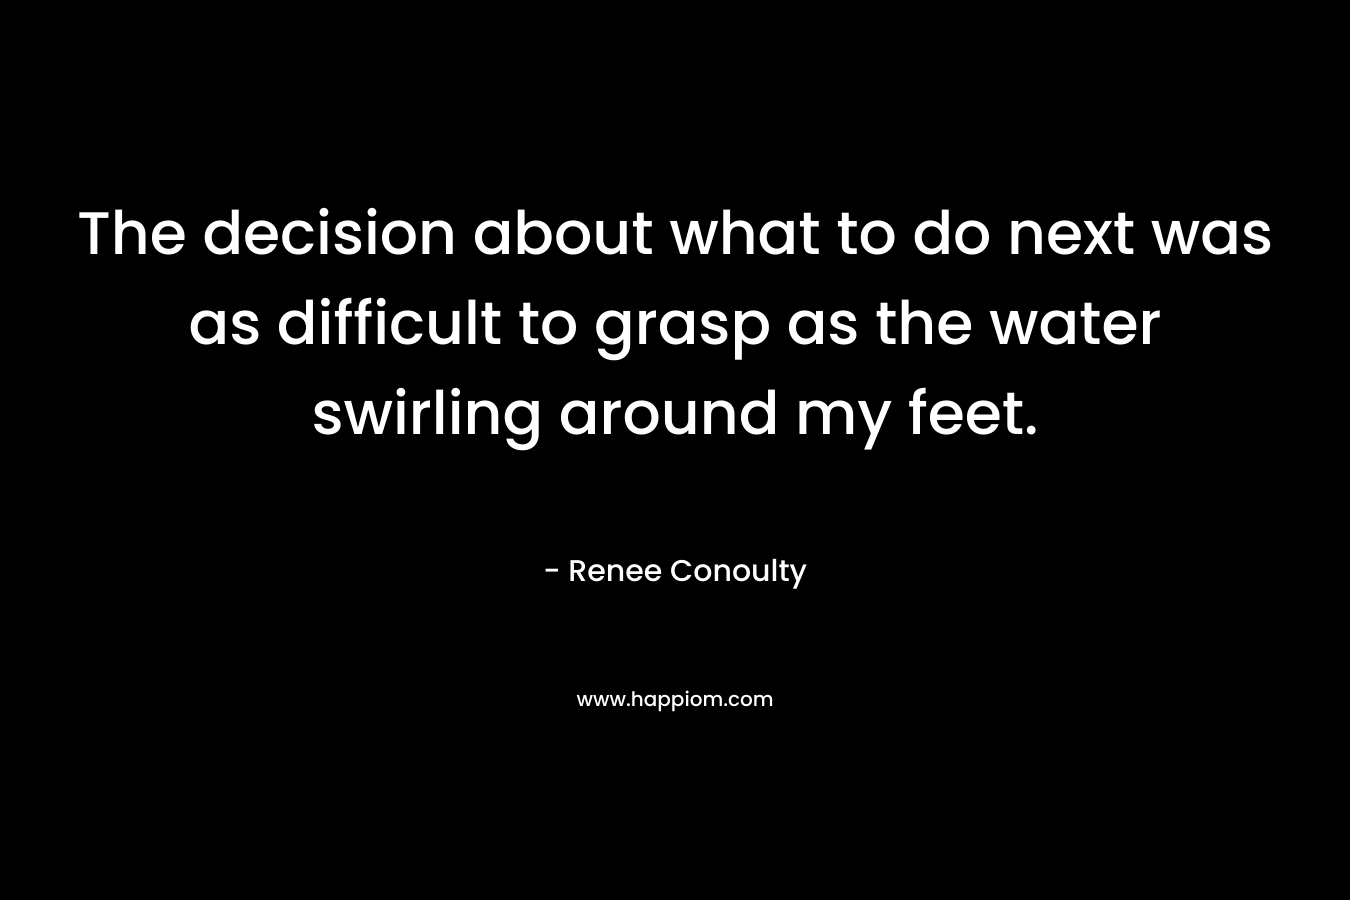 The decision about what to do next was as difficult to grasp as the water swirling around my feet. – Renee Conoulty